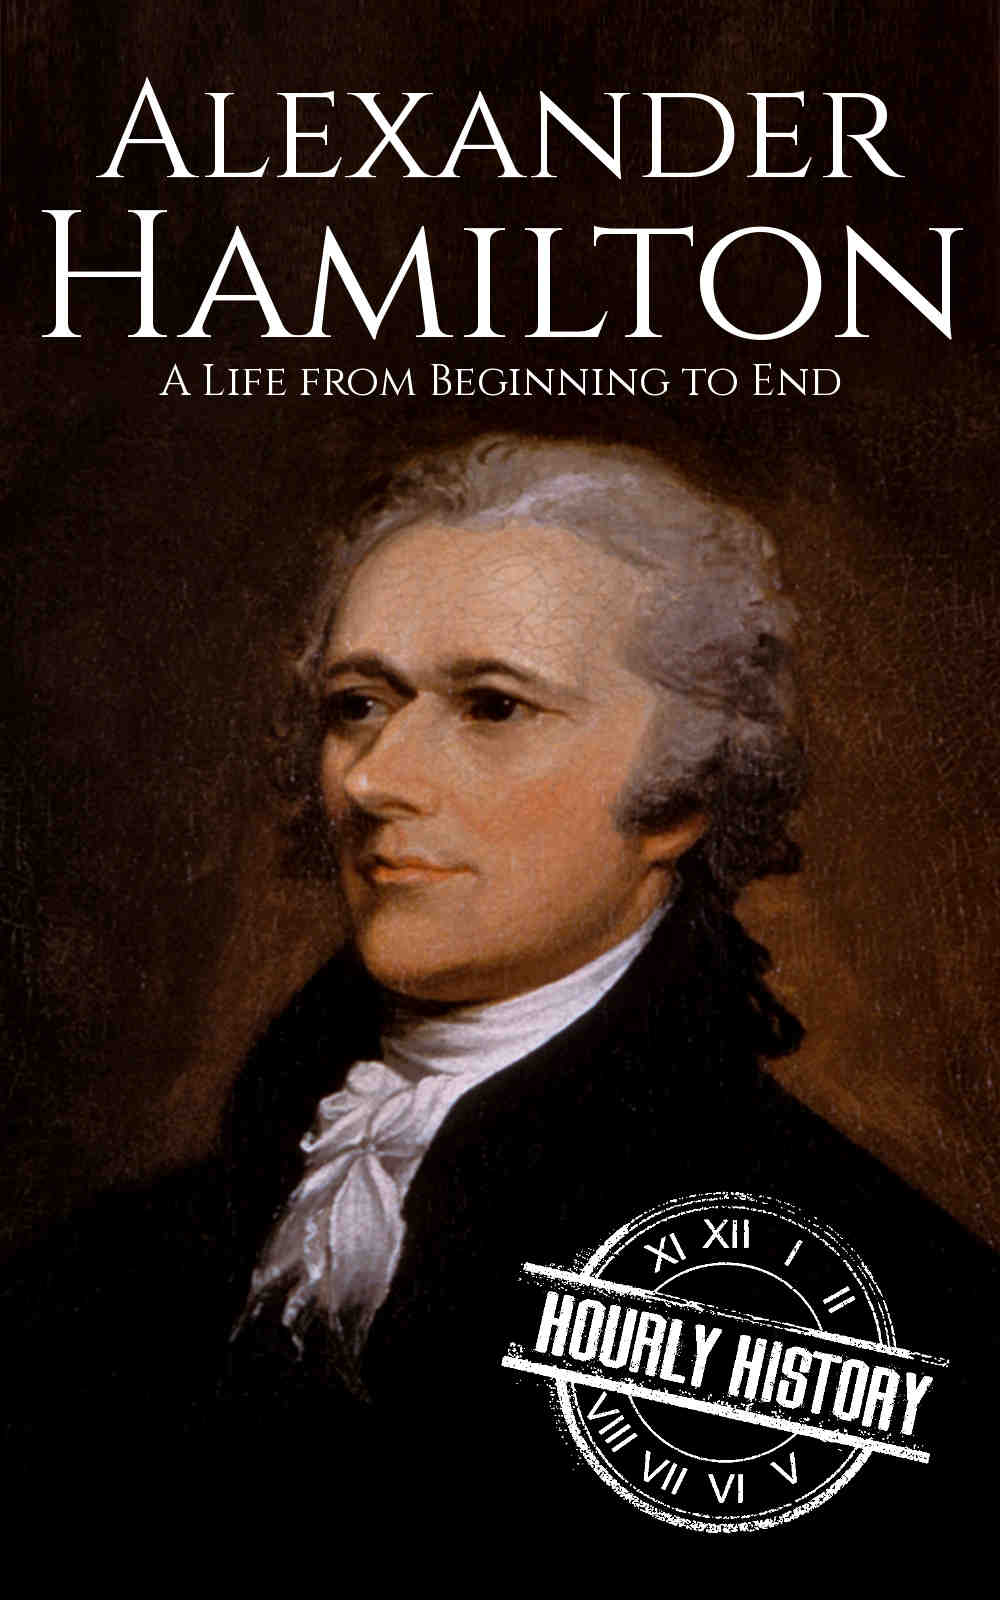 Alexander Hamilton Biography And Facts 1 Source Of History Books